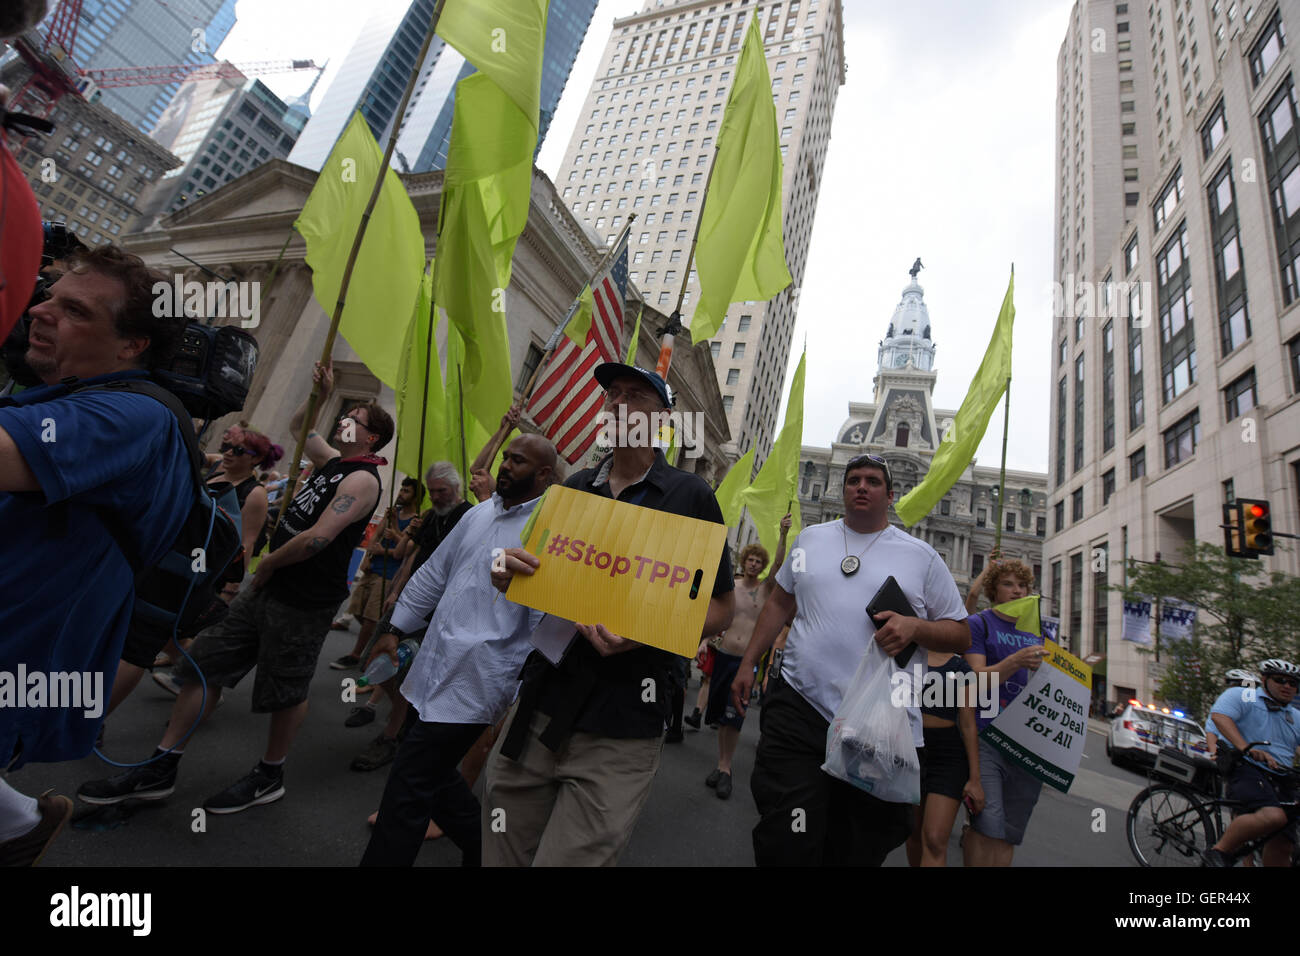 Philadelphia, United States. 25th July, 2016. Thousands of activists filled downtown Philadelphia & FDR Park to protest on behalf of environmental issues, economic fairness, racial equality & against police brutality & in favor of Bernie Sanders on day one of the Democratic National Convention. © Andy Katz/Pacific Press/Alamy Live News Stock Photo